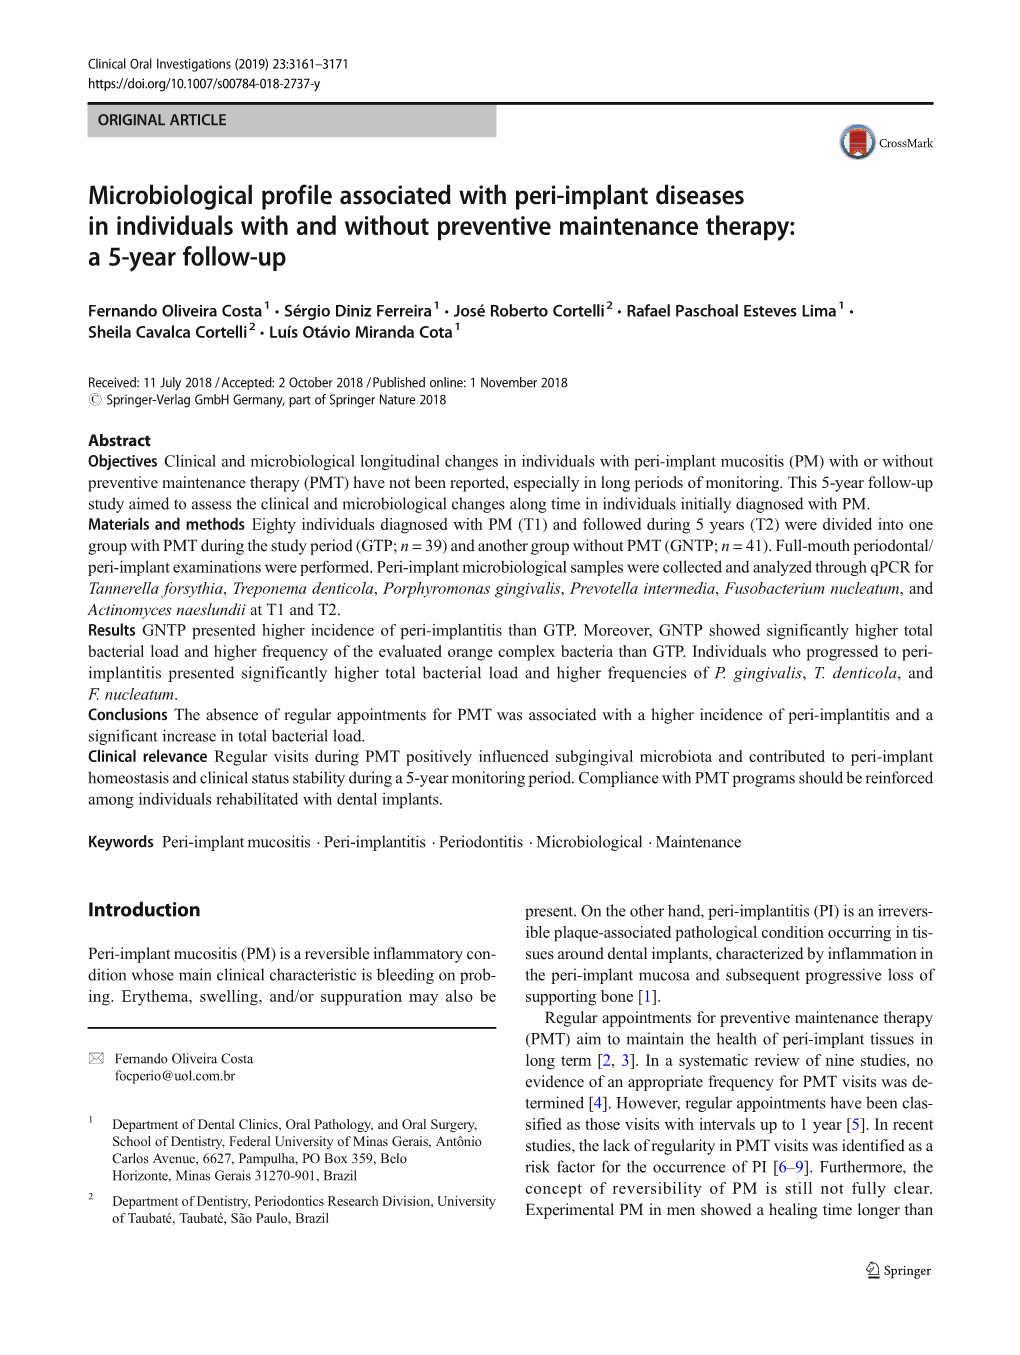 Microbiological Profile Associated with Peri-Implant Diseases in Individuals with and Without Preventive Maintenance Therapy: a 5-Year Follow-Up